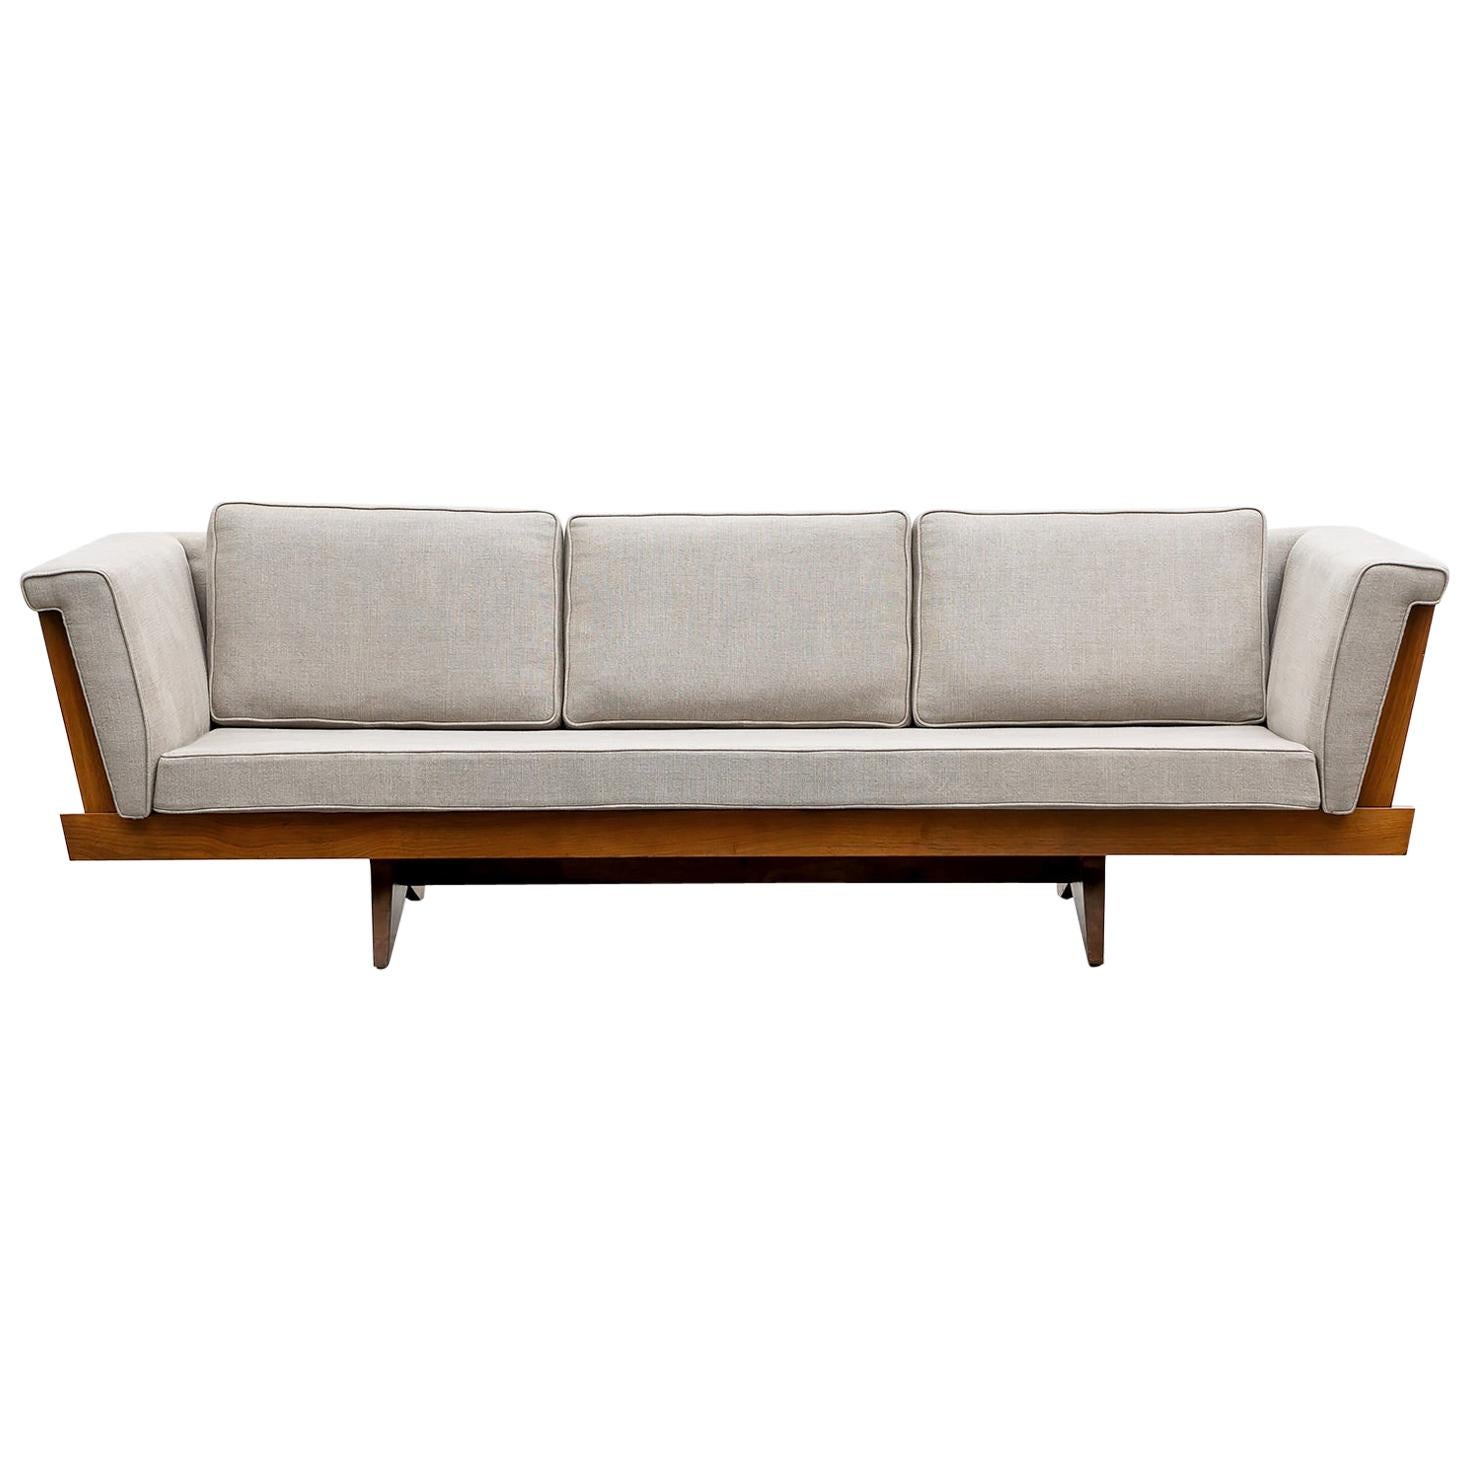 1960s Brown Wooden Sofa, New Upholstery by George Nakashima 'd'